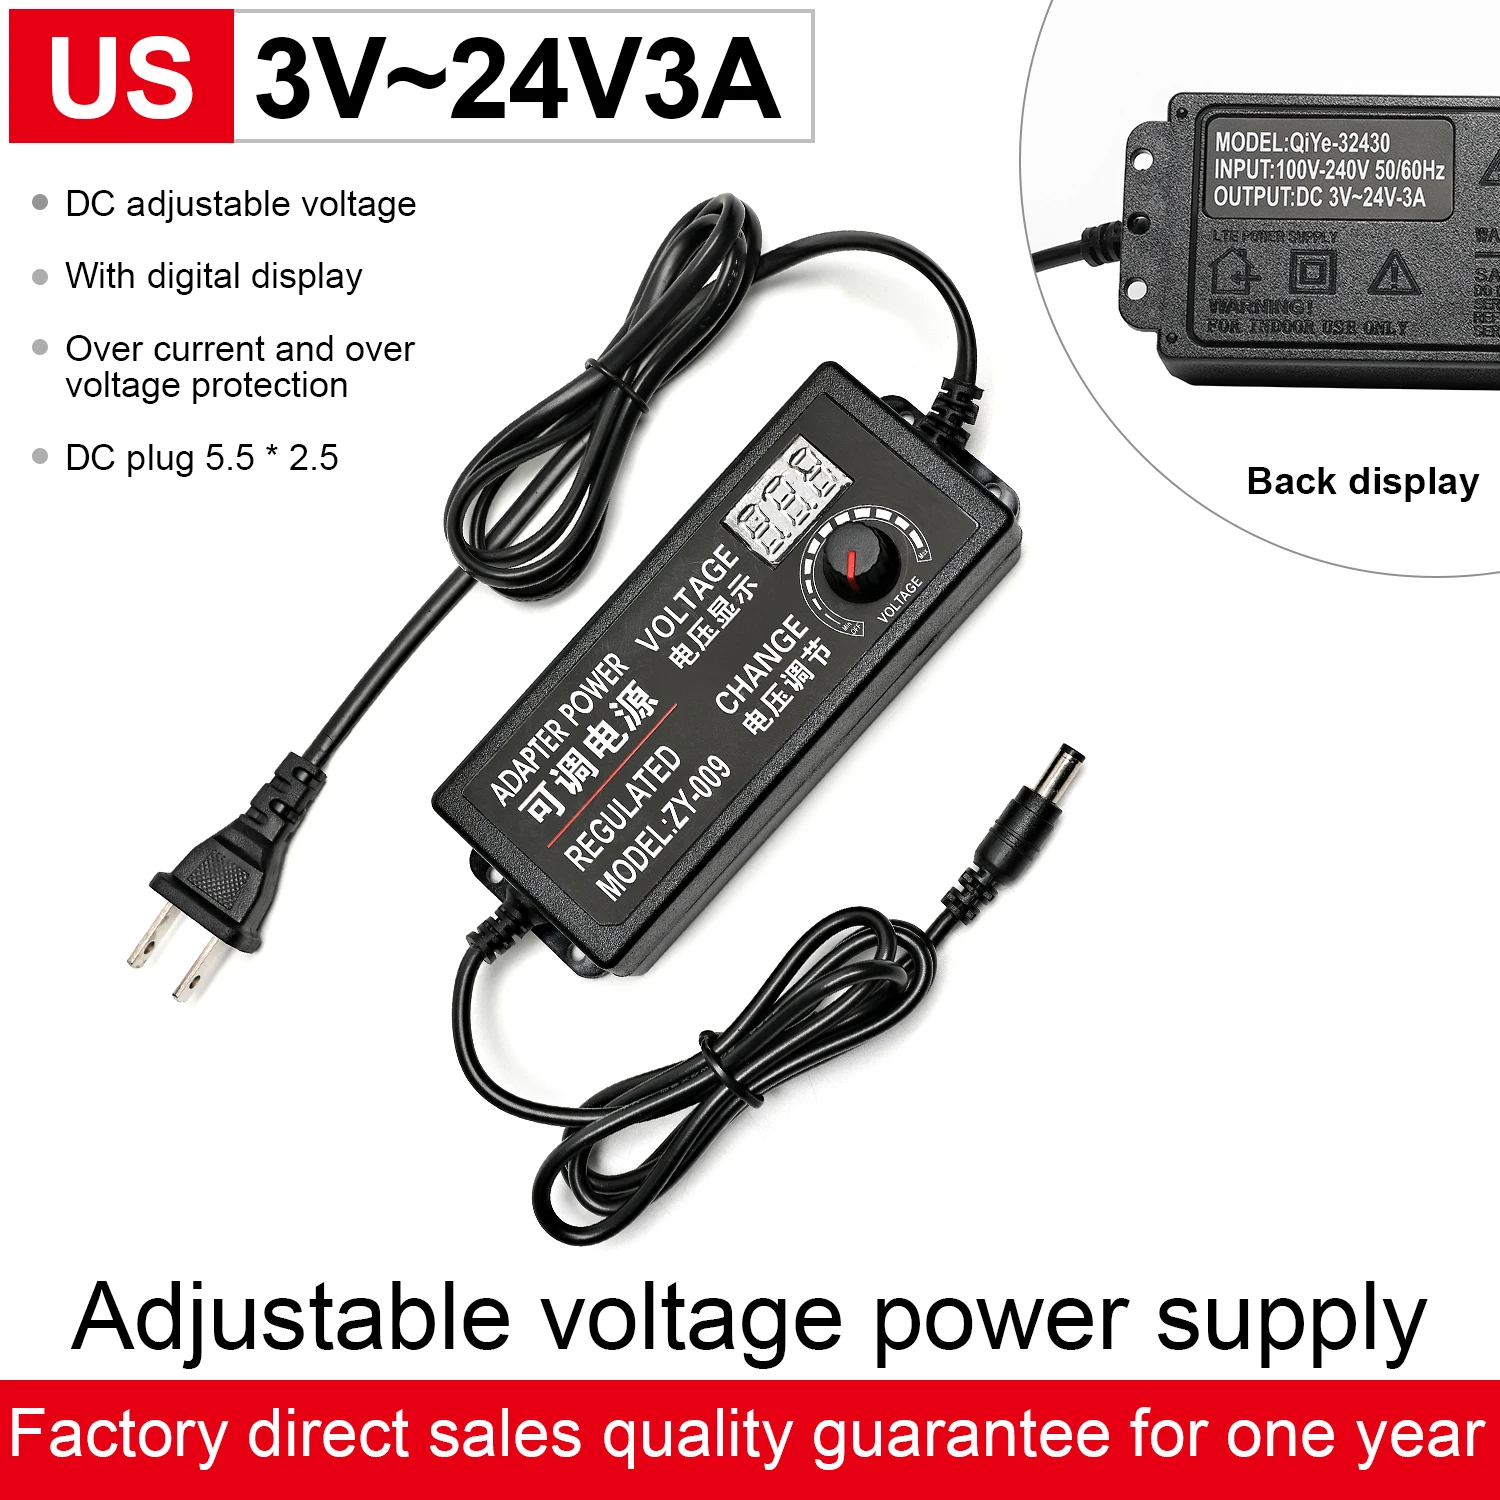 

3-24V SUSWE adjustable voltage DC power adapter stepless speed regulation dimming 3-12V 5A with display screen multi purpose 60W